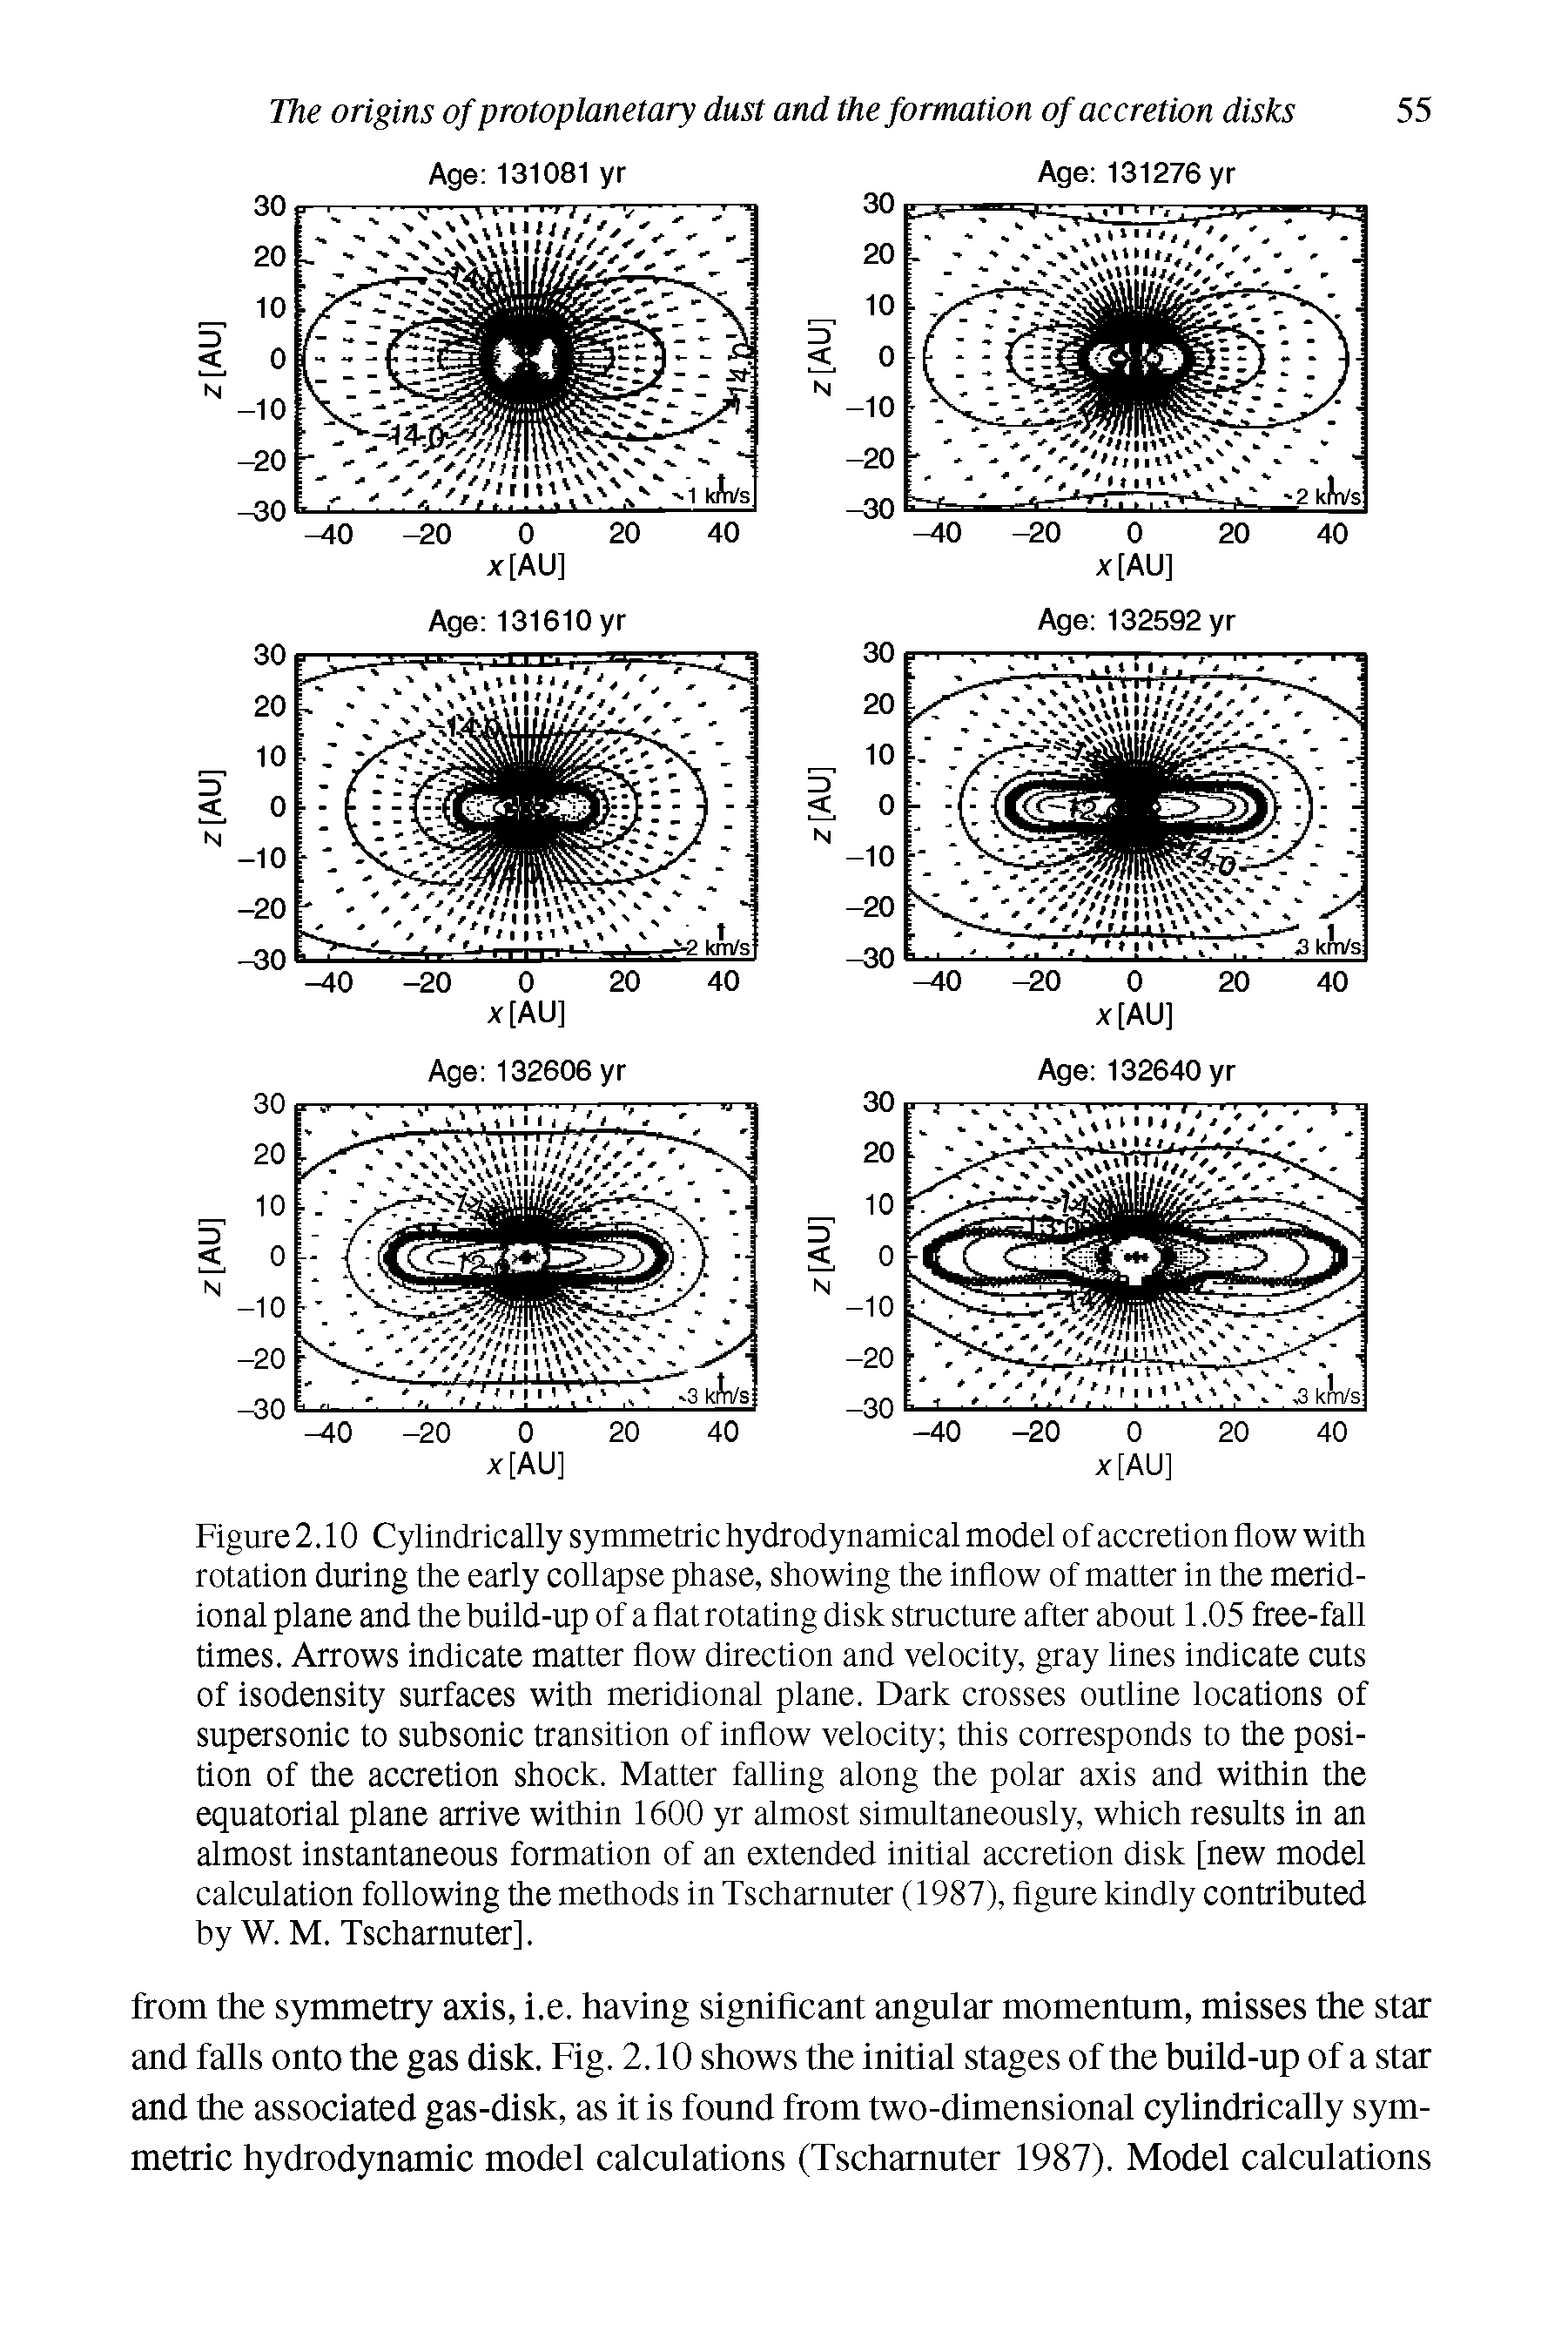 Figure 2.10 Cylindrically symmetric hydrodynamical model of accretion flow with rotation during the early collapse phase, showing the inflow of matter in the meridional plane and the build-up of a flat rotating disk structure after about 1.05 free-fall times. Arrows indicate matter flow direction and velocity, gray lines indicate cuts of isodensity surfaces with meridional plane. Dark crosses outline locations of supersonic to subsonic transition of inflow velocity this corresponds to the position of the accretion shock. Matter falling along the polar axis and within the equatorial plane arrive within 1600 yr almost simultaneously, which results in an almost instantaneous formation of an extended initial accretion disk [new model calculation following the methods in Tscharnuter (1987), figure kindly contributed by W. M. Tscharnuter],...